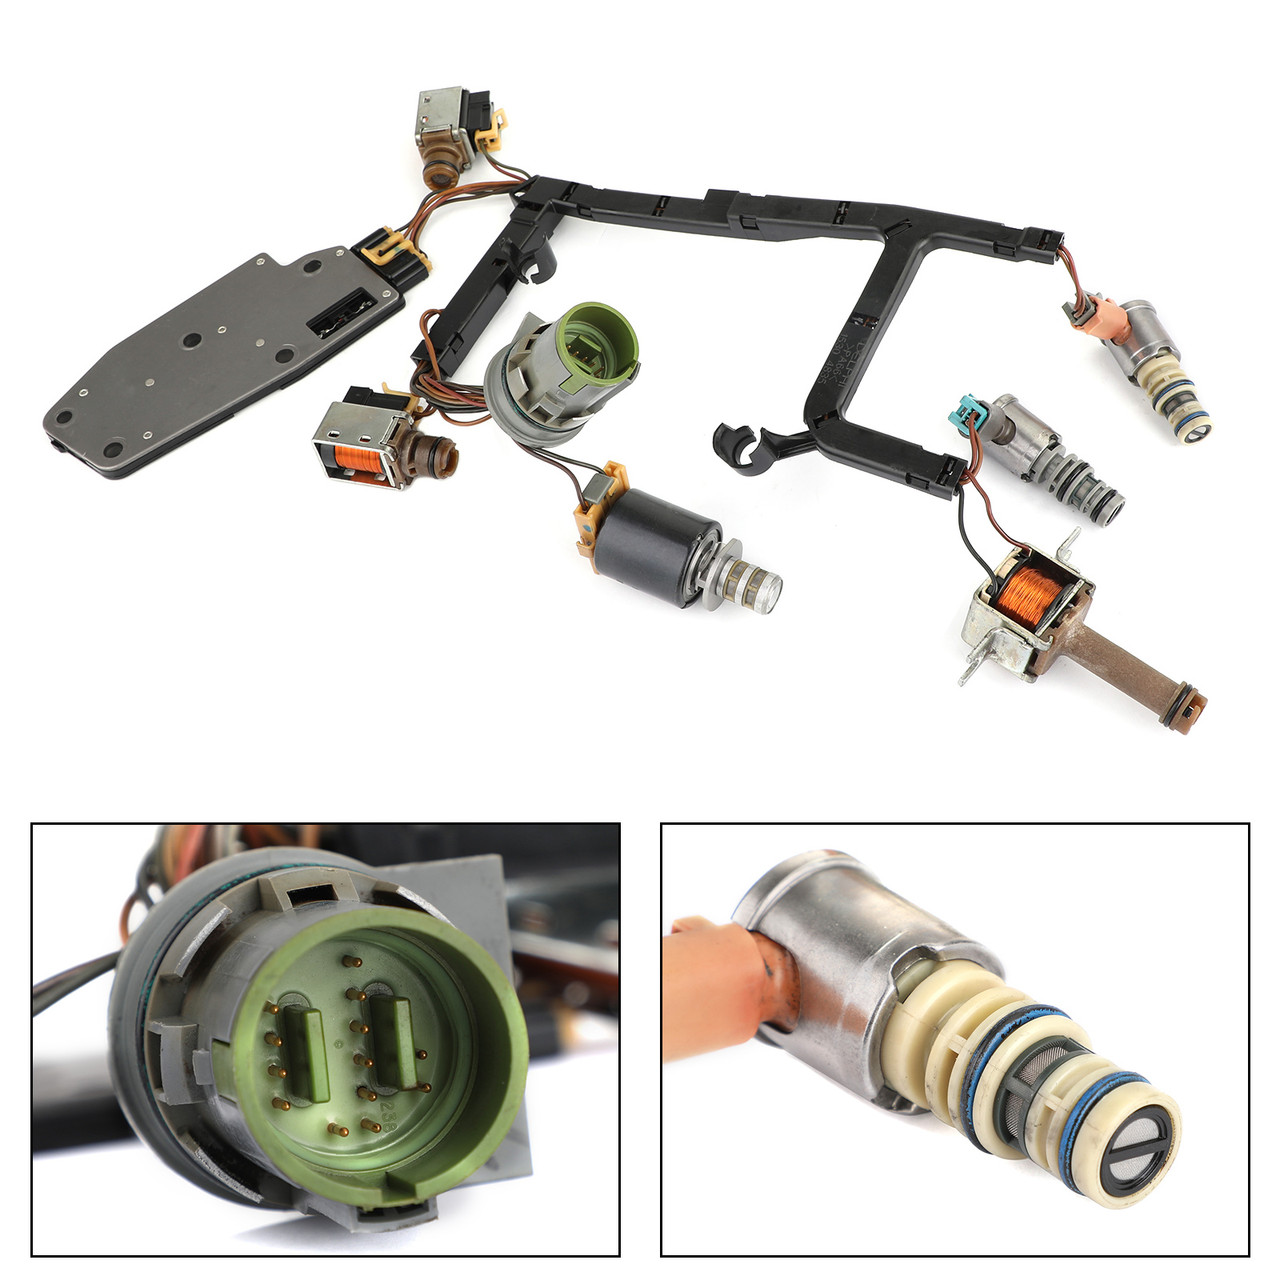 Transmission Solenoid Kit W/Harness Fits For GM Products with the 4L60E Model Automatic Transmission 93-02